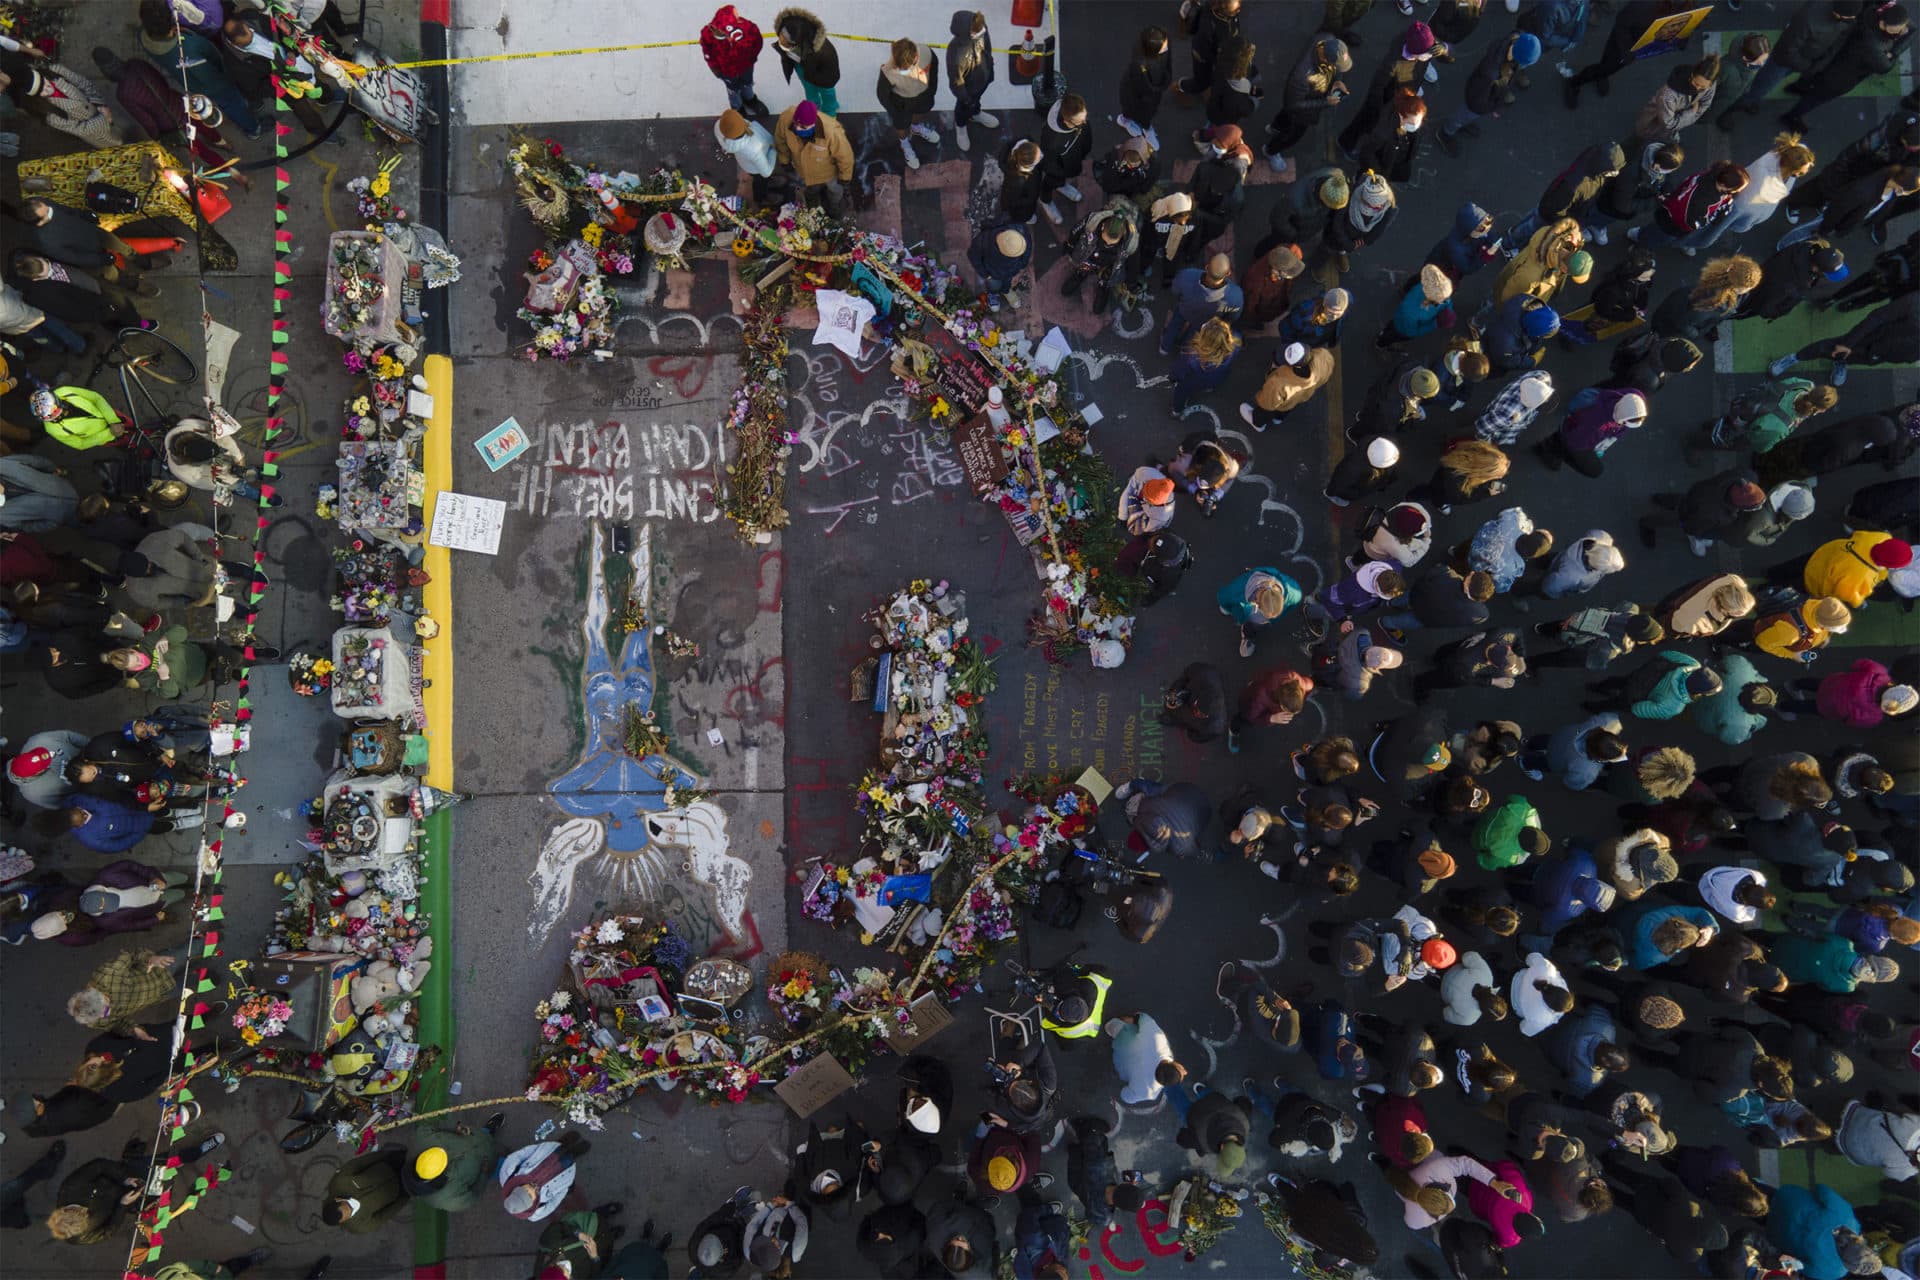 A crowd gathers next to the spot where George Floyd was murdered at George Floyd Square. (Julio Cortez/AP)